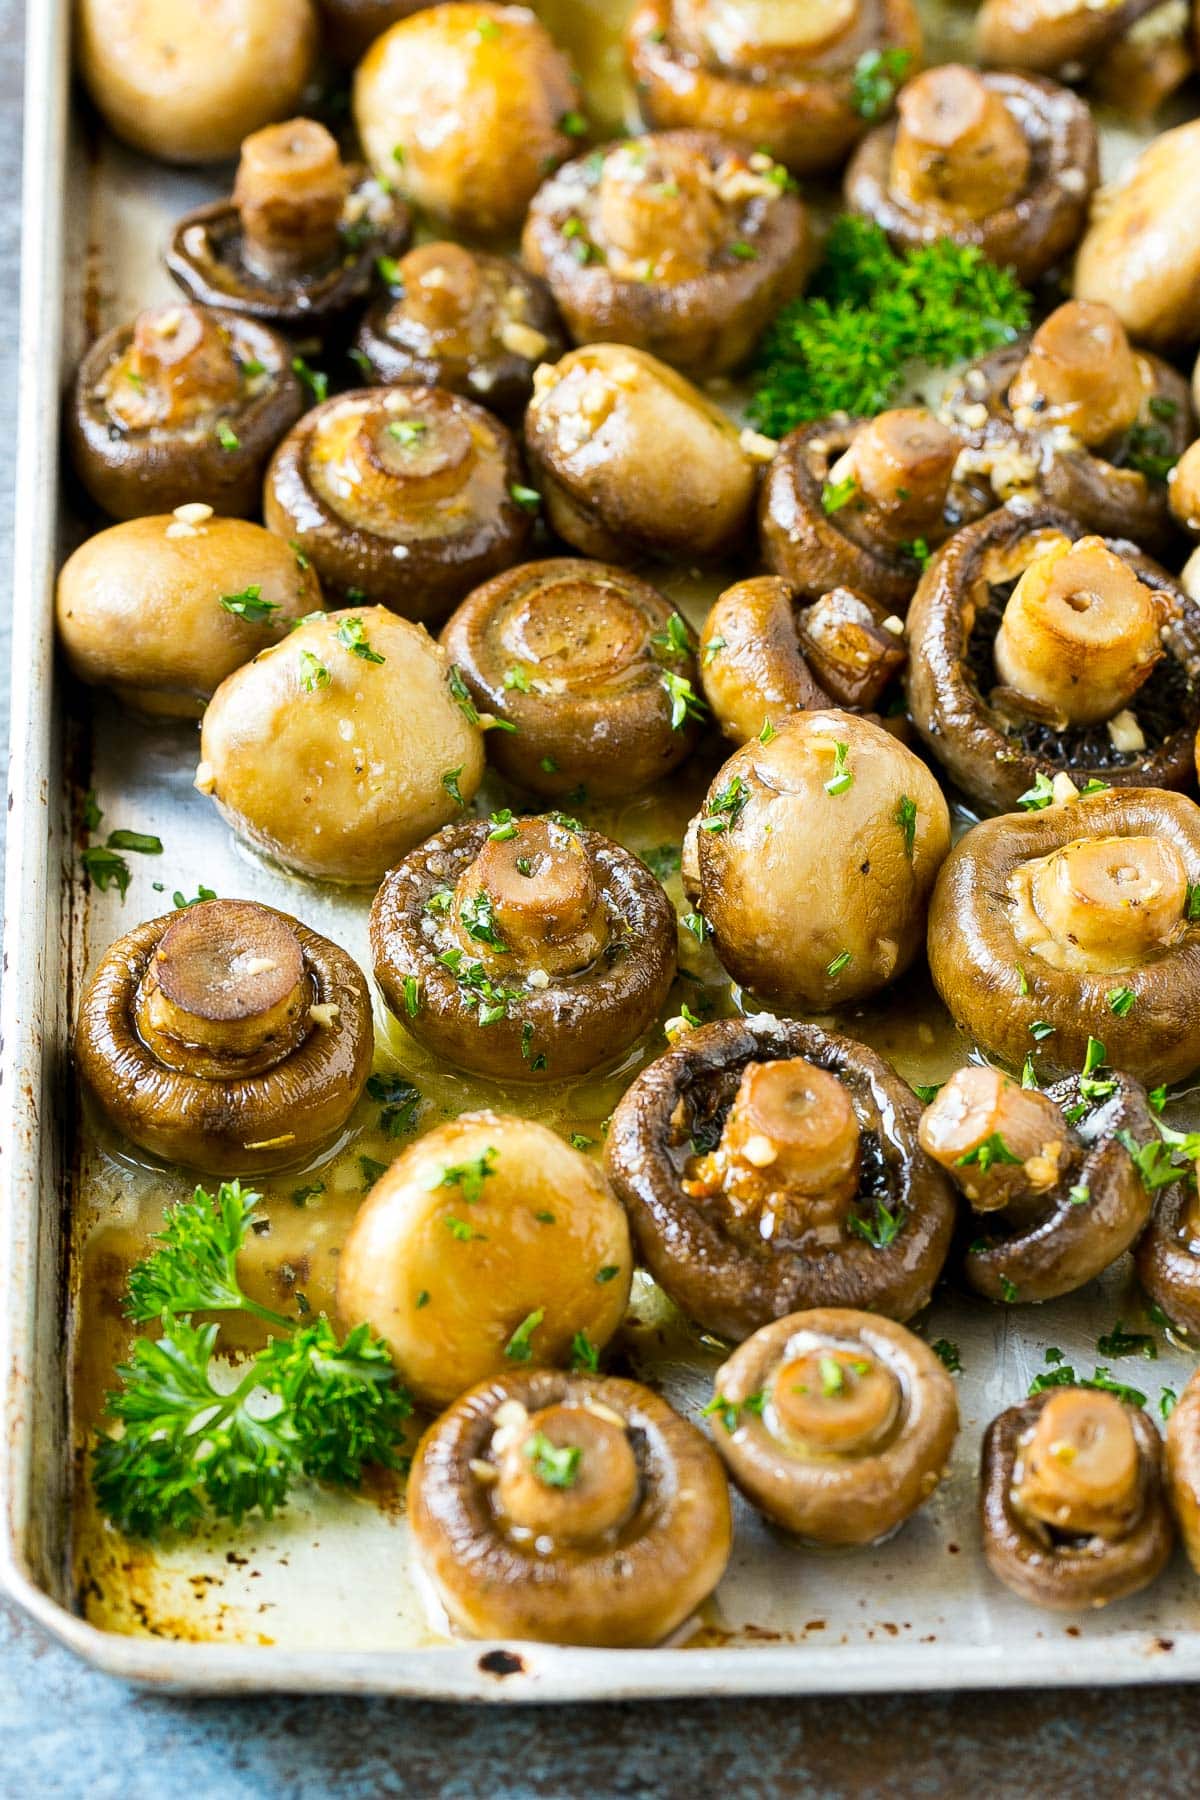 Roasted mushrooms on a pan garnished with parsley.